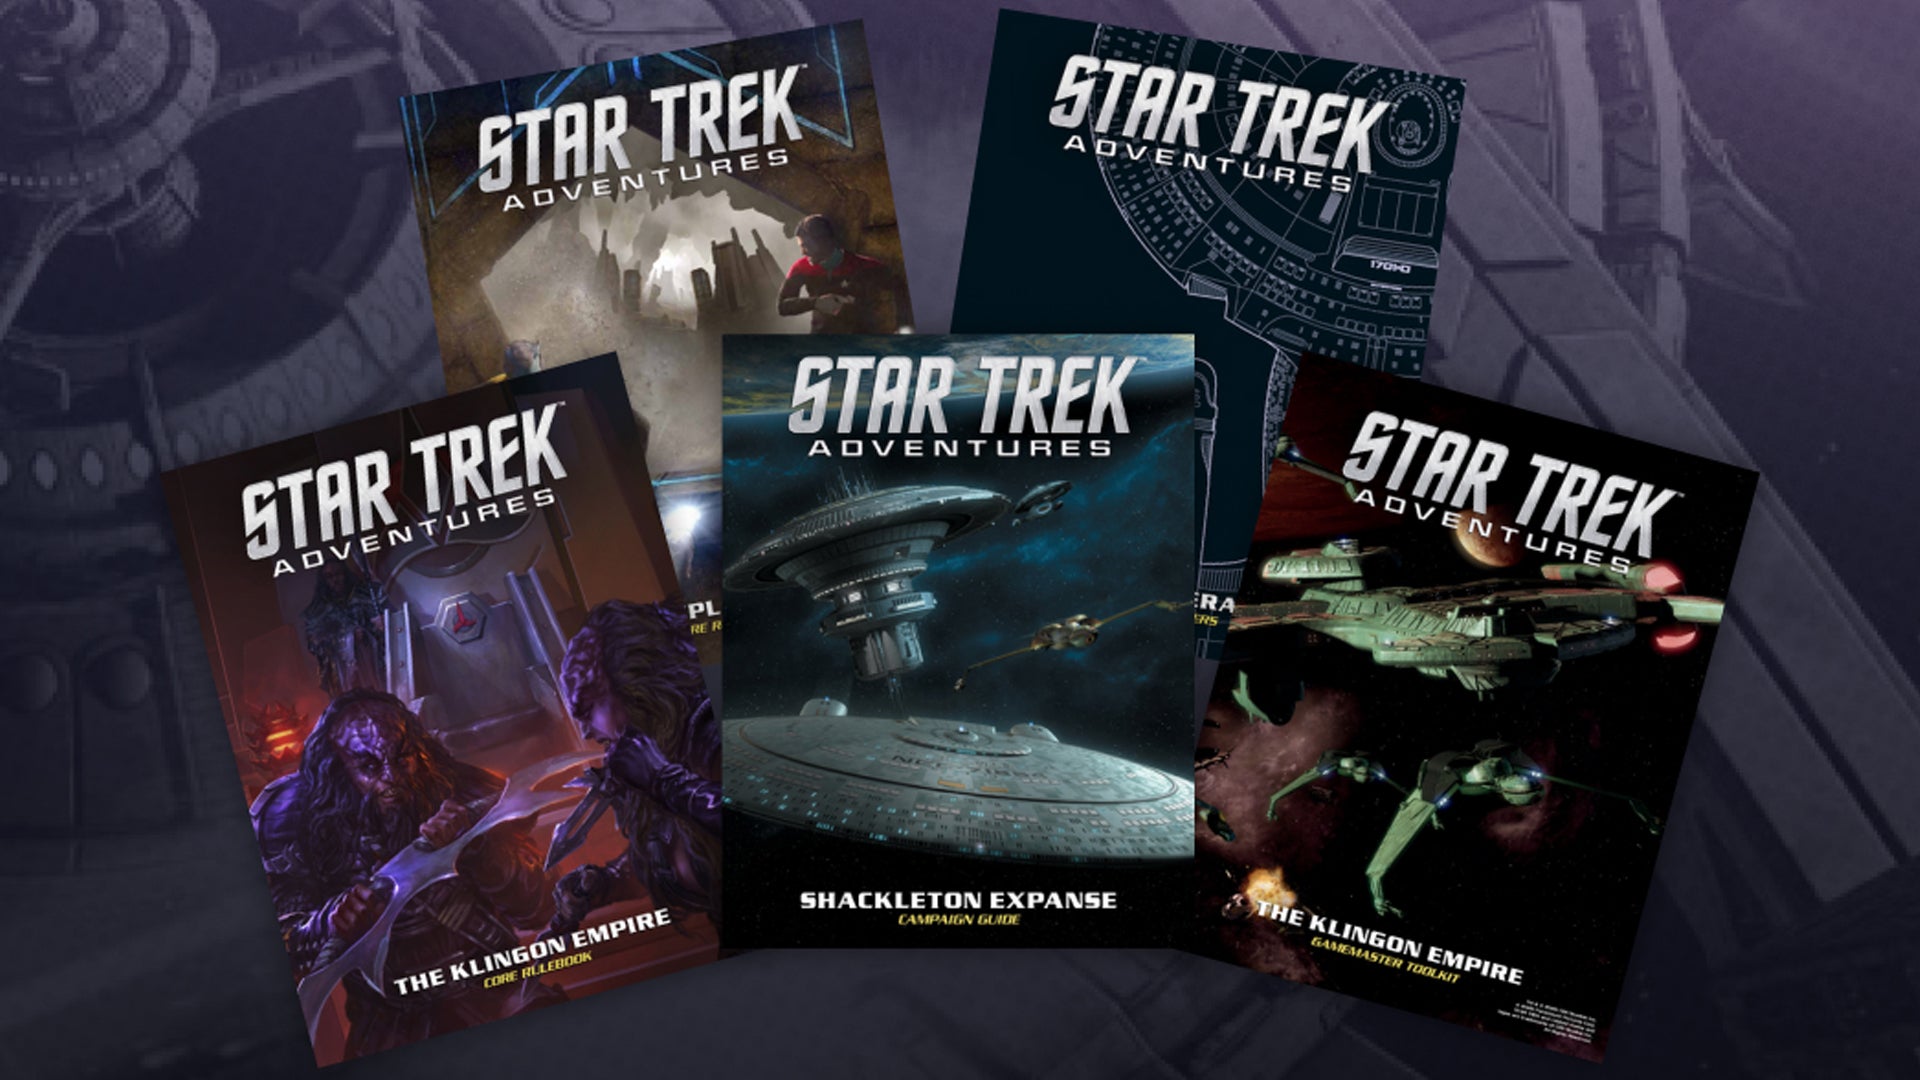 Image for Star Trek Adventures RPG bundle offers core rules, TNG and TOS expansions, and playable Klingons for £25